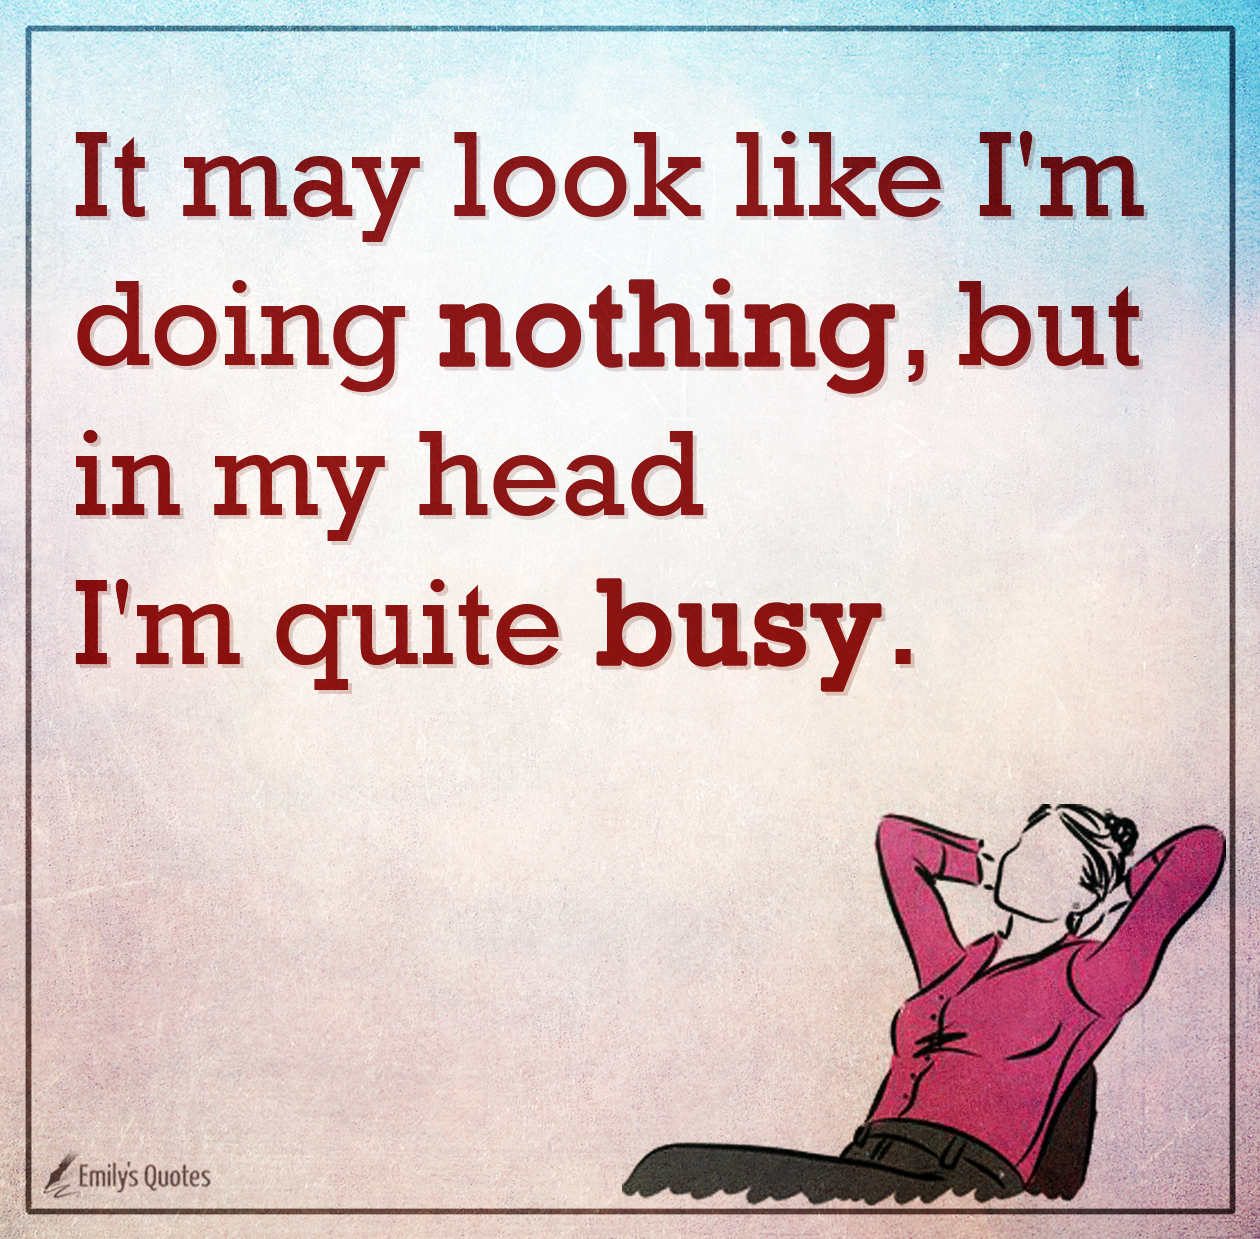 It may look like I’m doing nothing, but in my head I’m quite busy